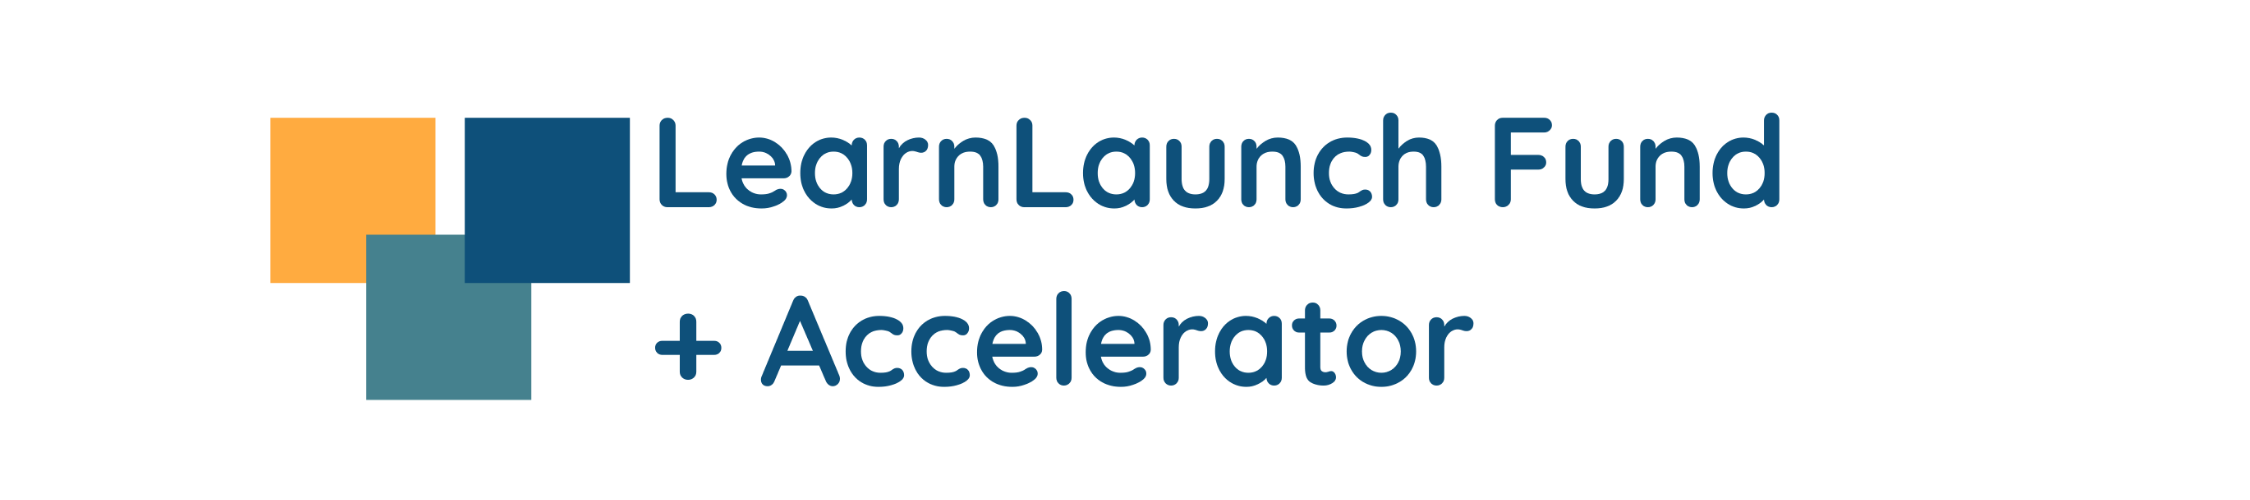 LearnLaunch Fund Plus Accelerator_Logo.png